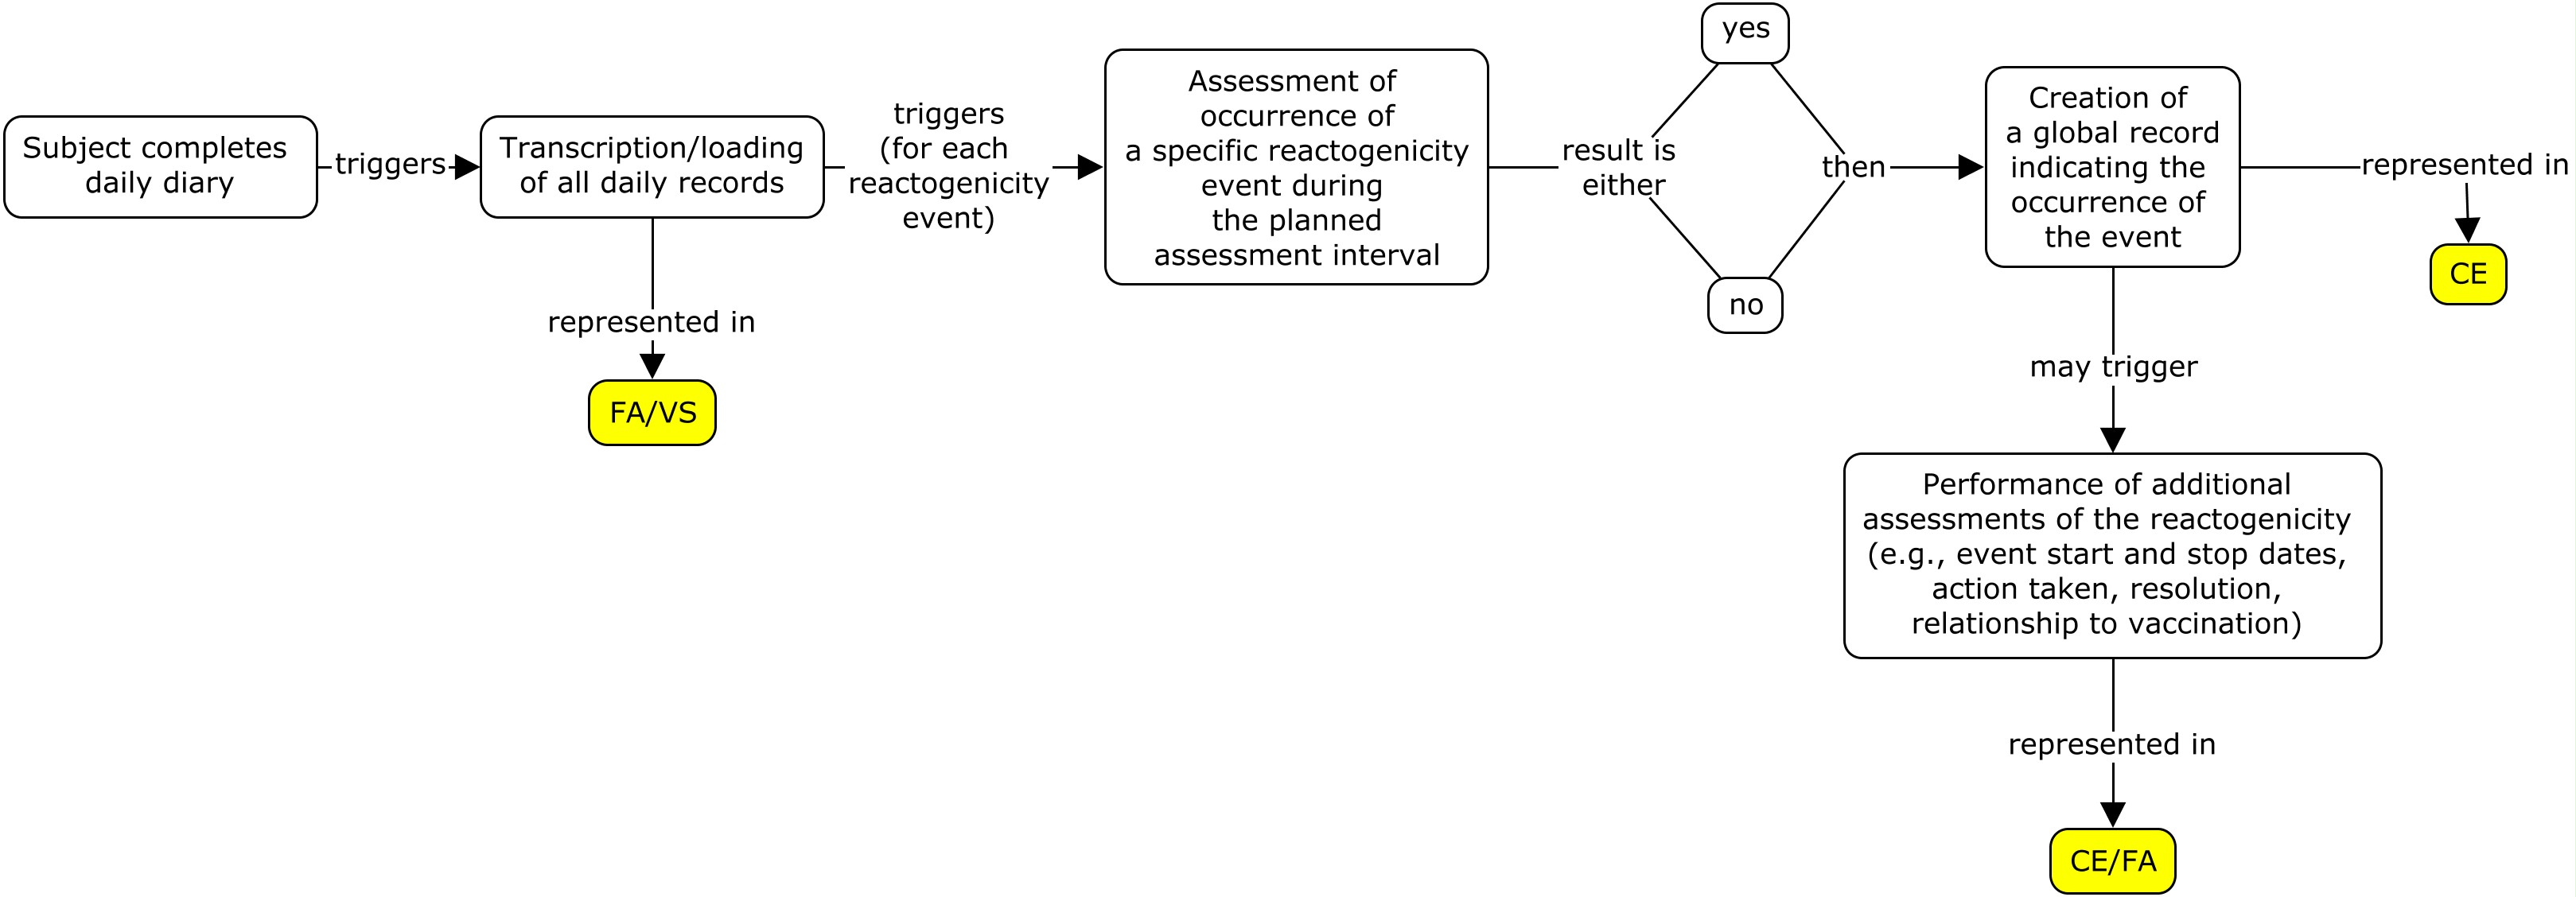 Diagram of a flat model for assessing reactogenicity